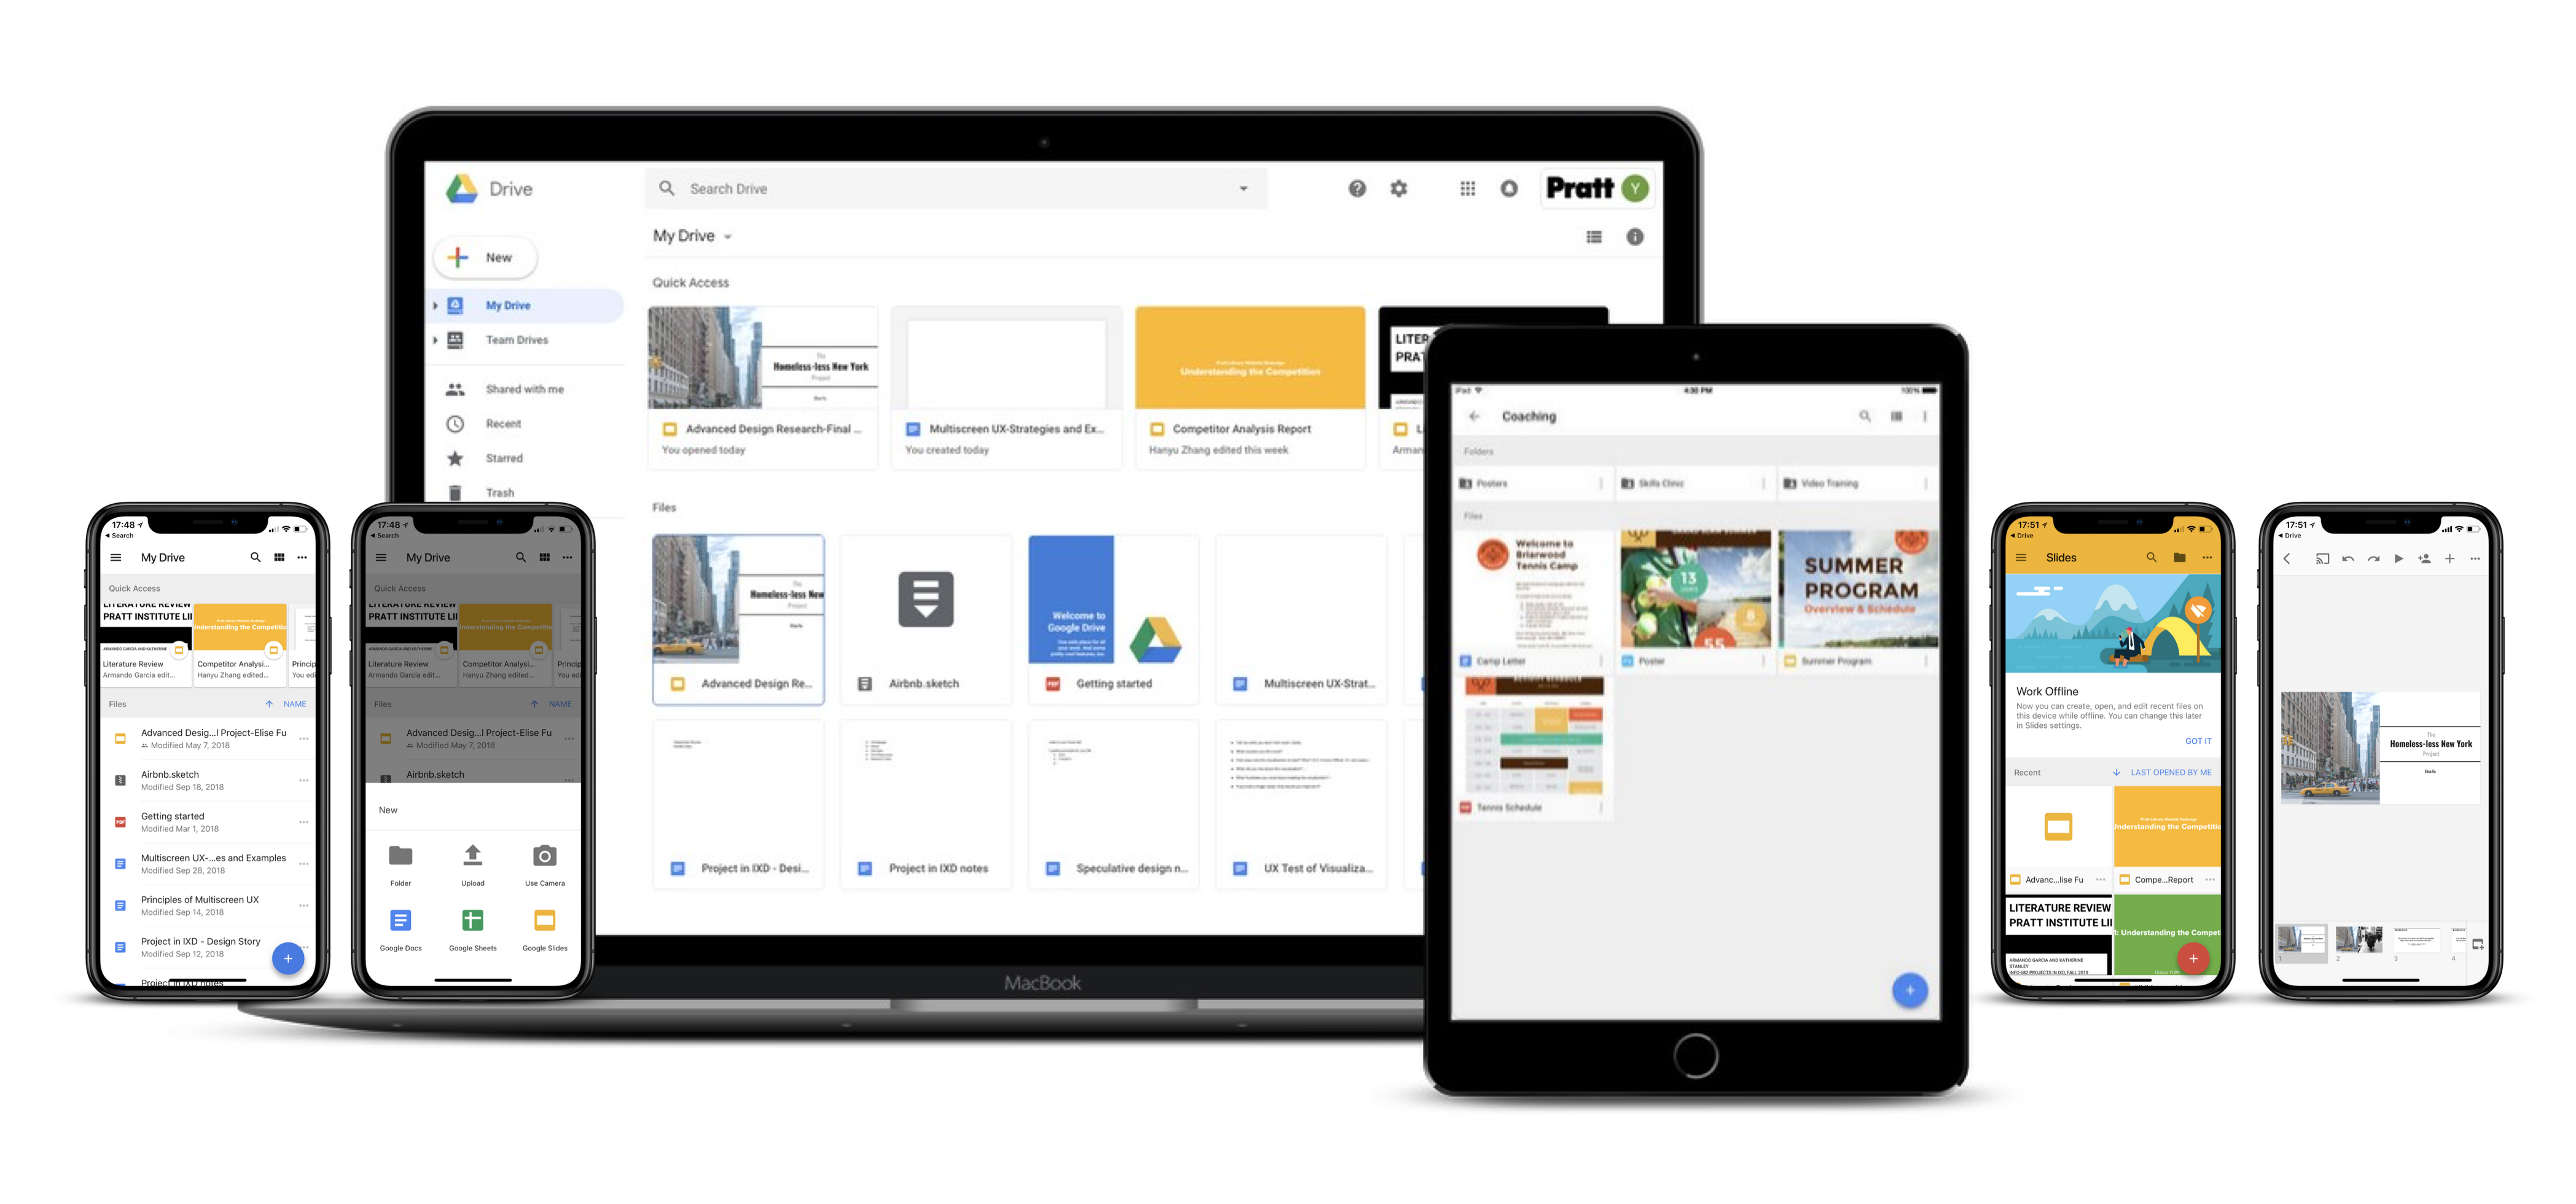 Google Drive and Slides-Multiscreen UX